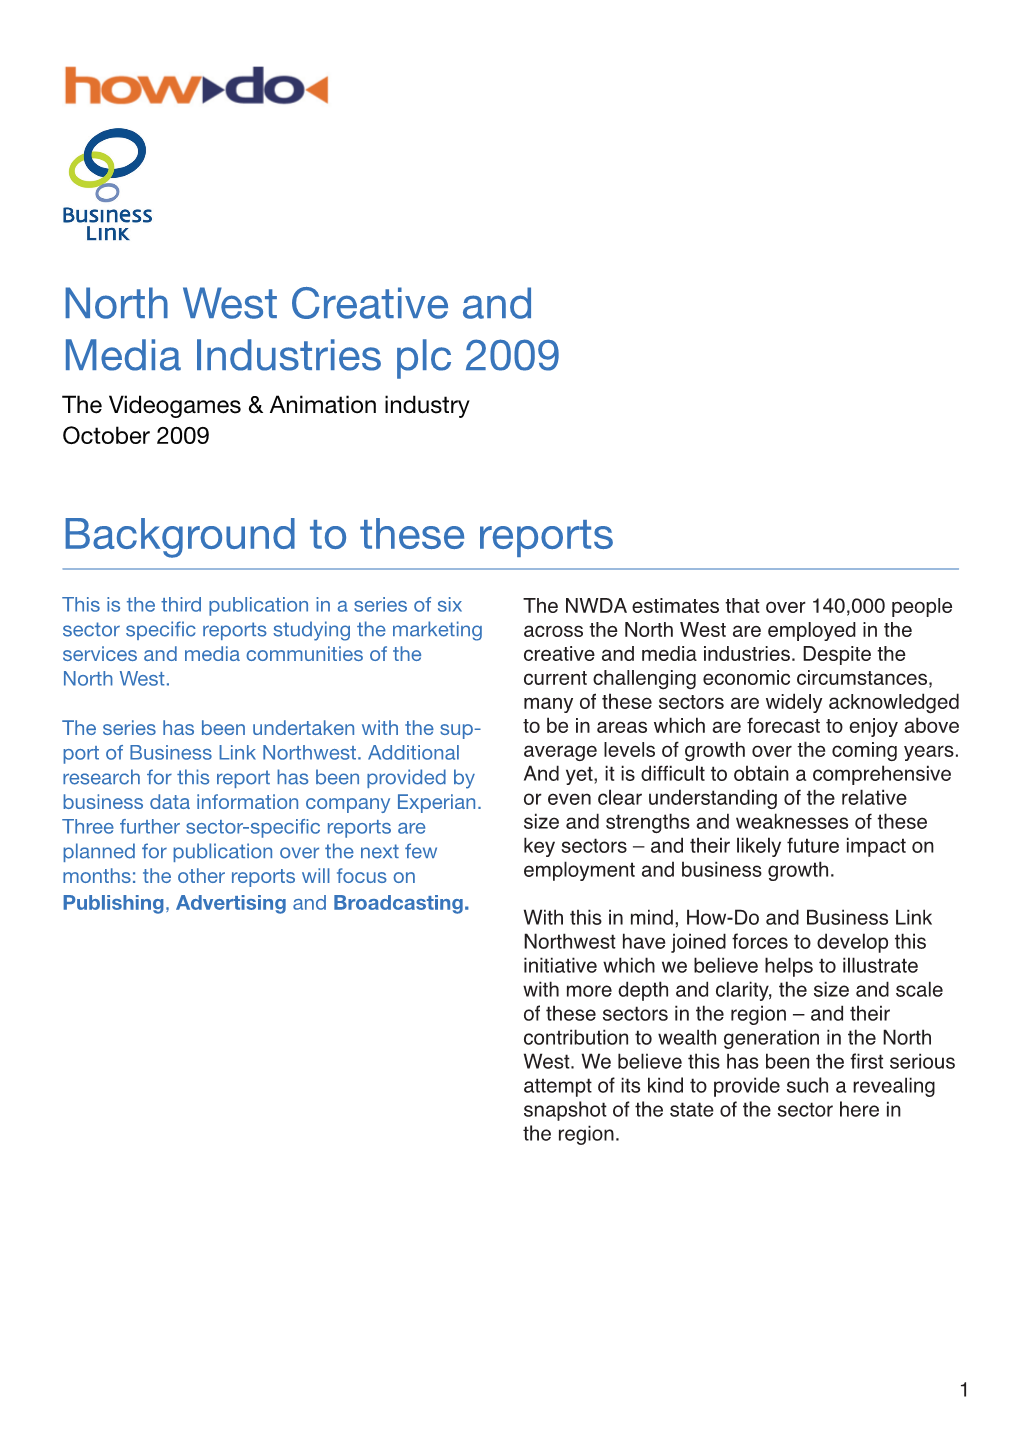 North West Creative and Media Industries Plc 2009 Background To